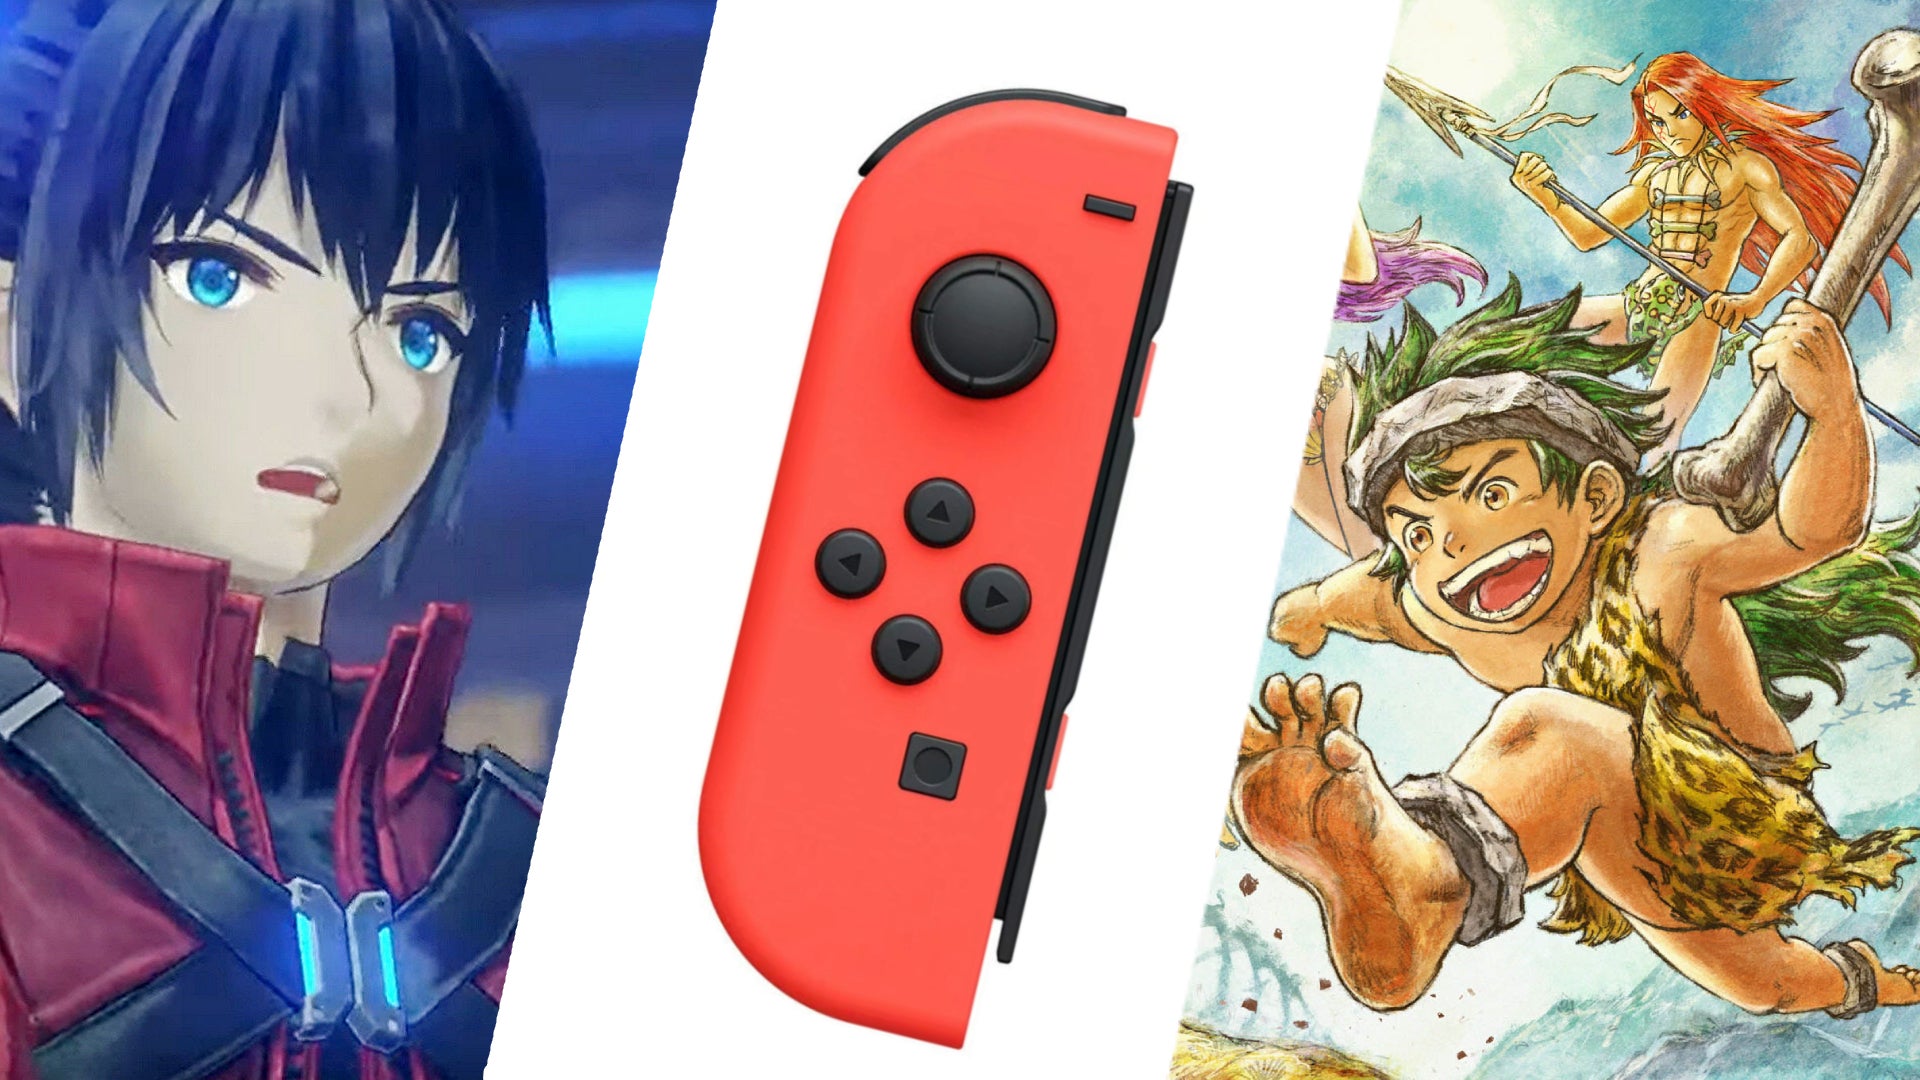 Image for Live A Live and Xenoblade 3 showcase Nintendo’s new RPG golden age